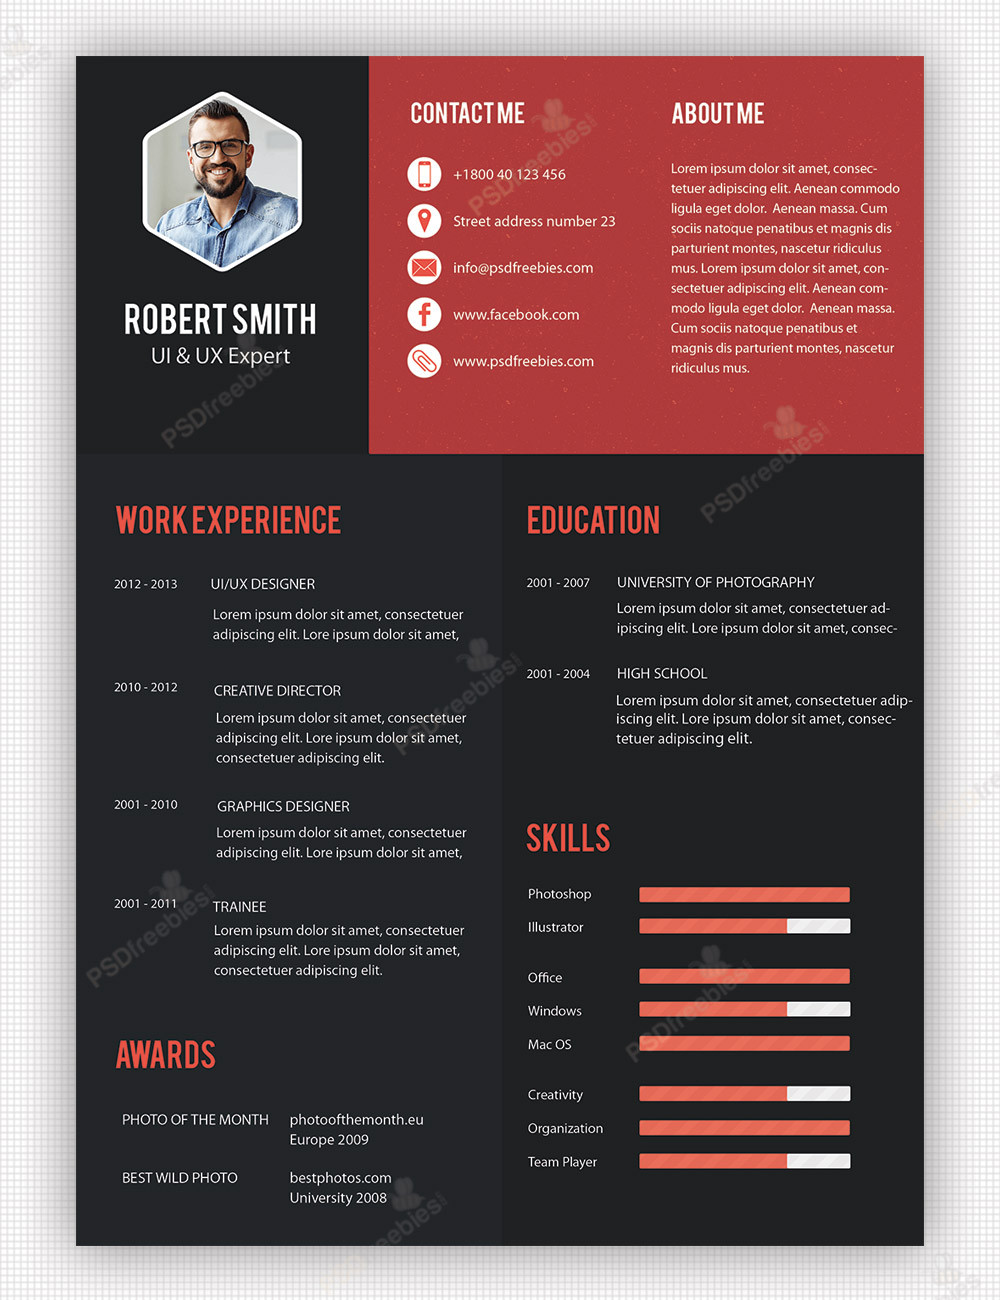 Professional Resume Templates for Freshers Free Download Creative Professional Resume Template Free Psd â Psdfreebies.com